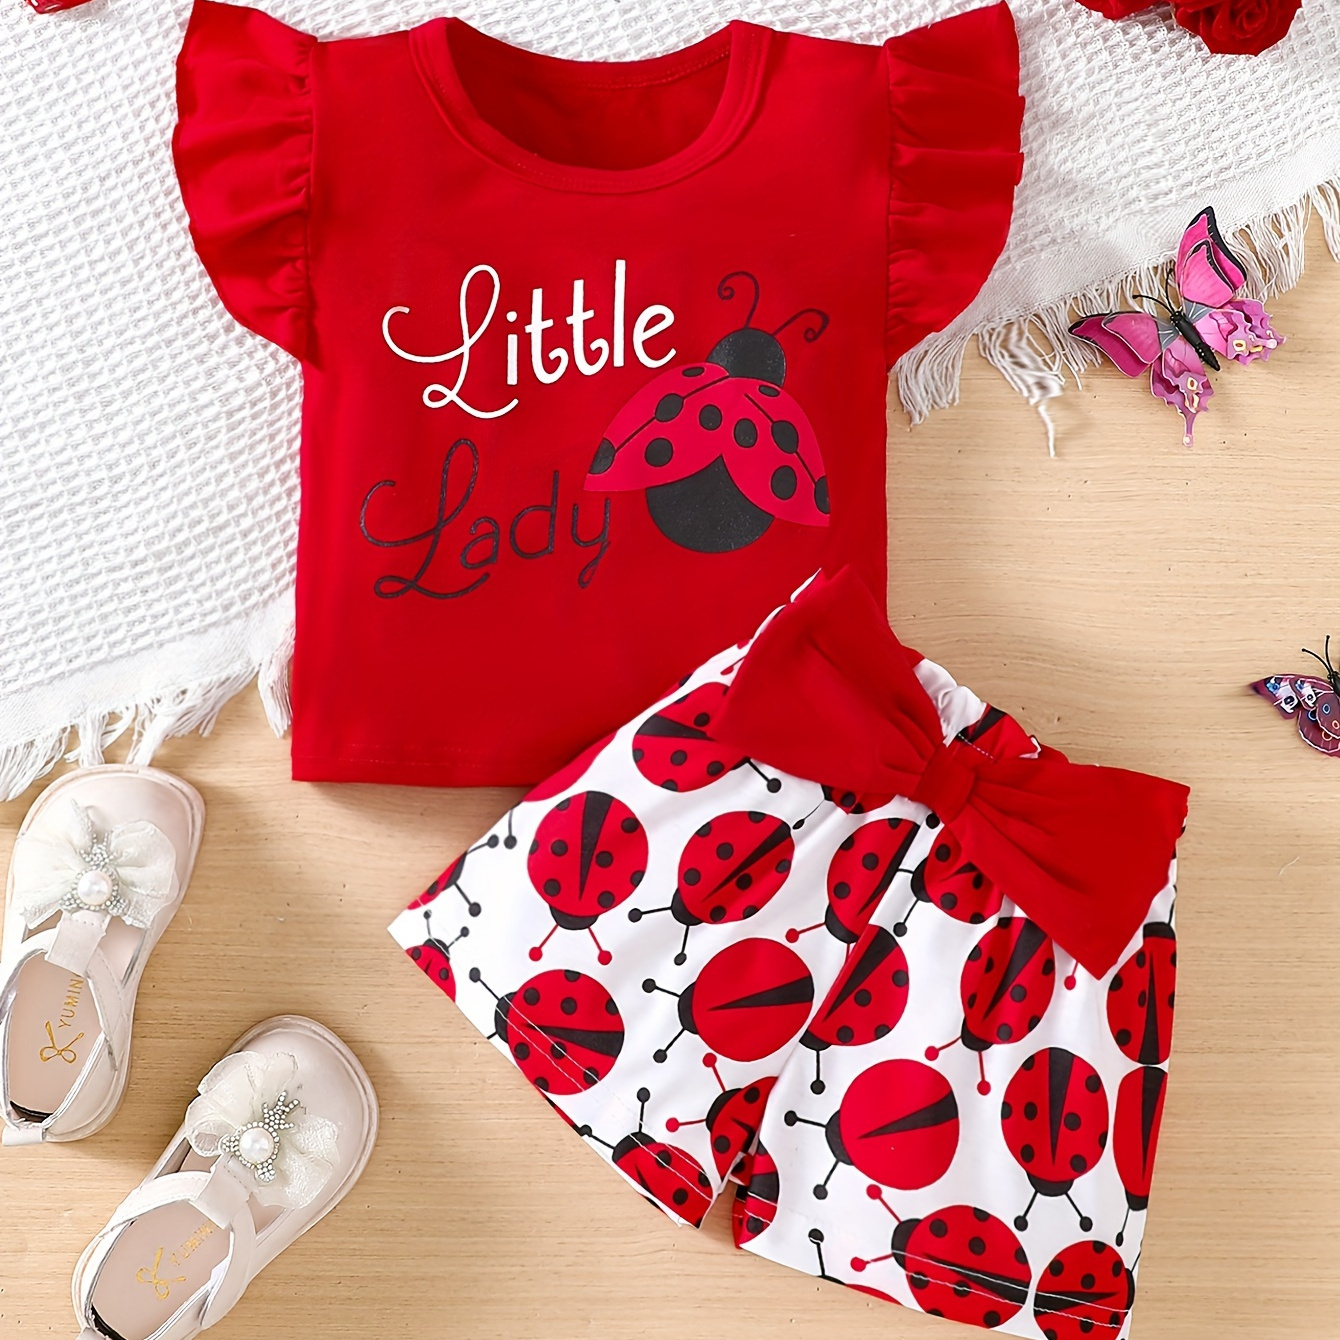 

Baby Girl's Ruffle Trim Sleeve Cute Graphic T-shirt & Bowknot Ladybug Pattern Shorts Set, Casual Summer Outfit